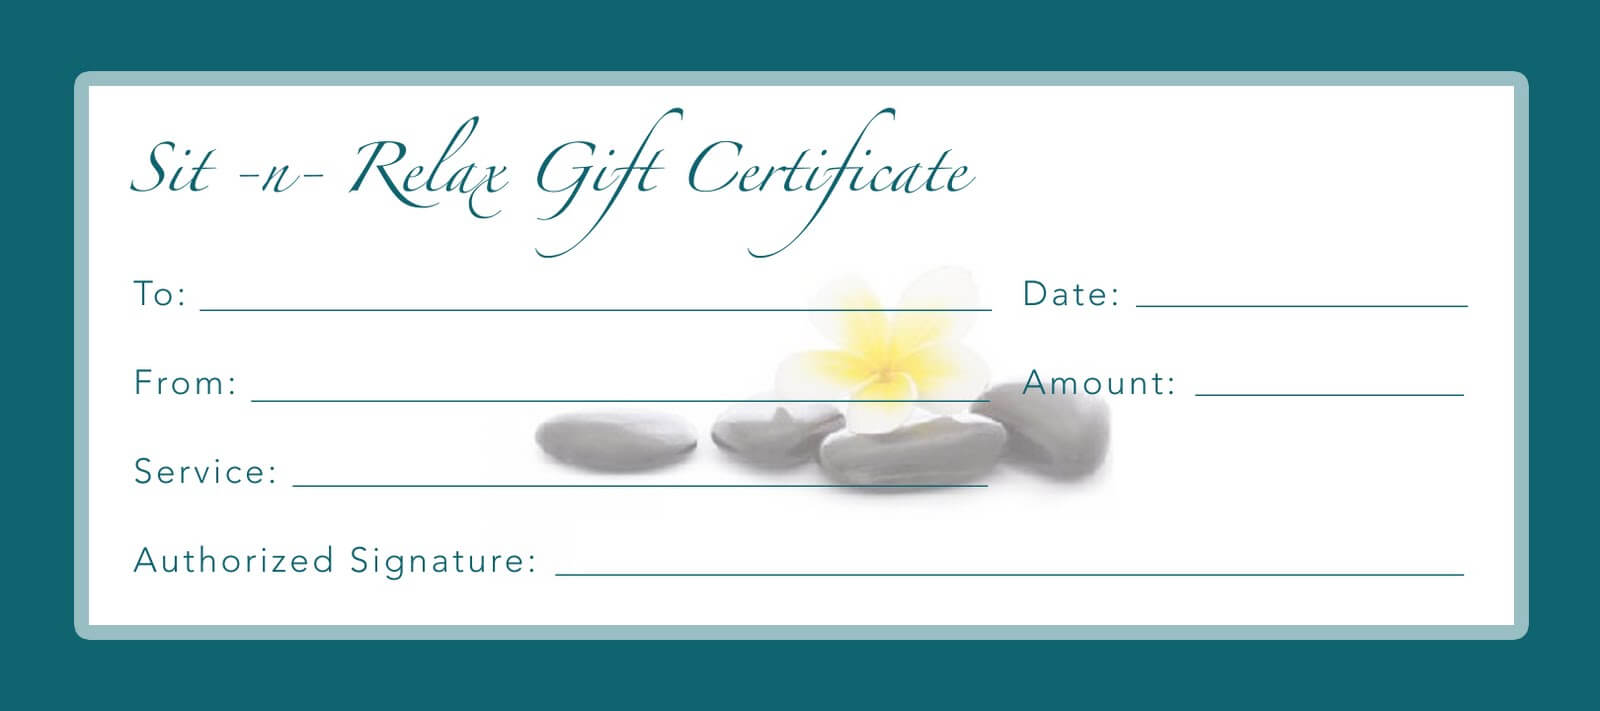 Free Spa Gift Certificate Template Printable Within Massage Gift Certificate Template Free Printable